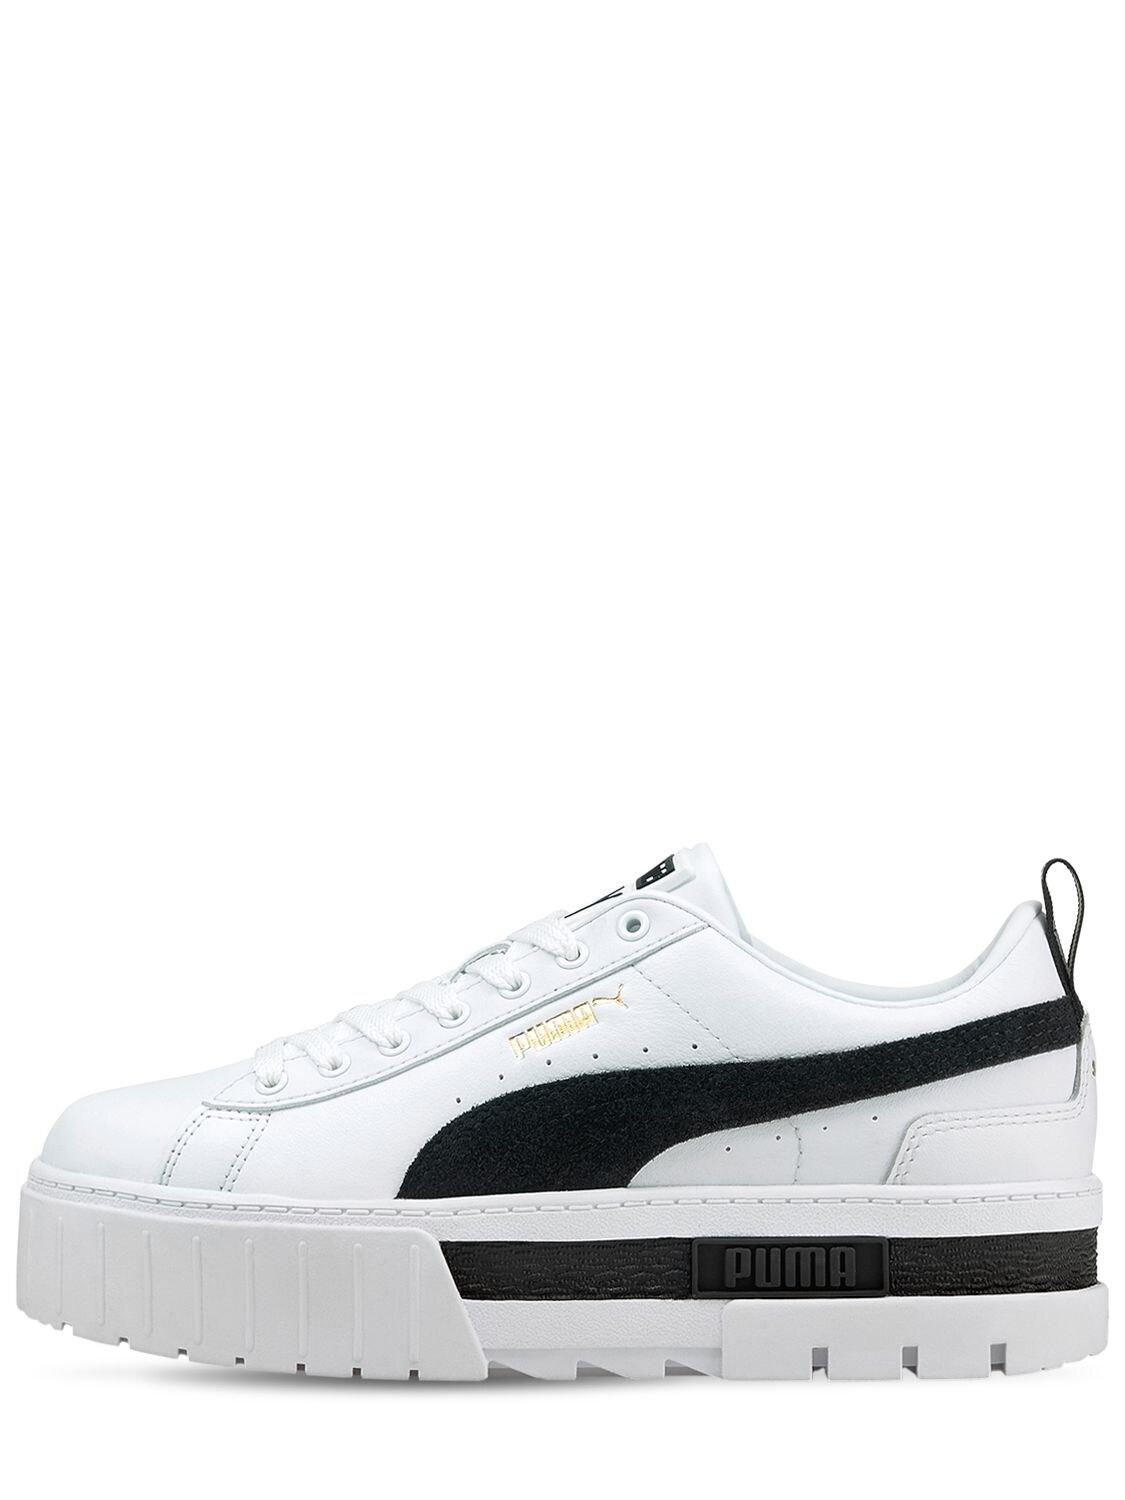 PUMA Mayze Leather Platform Sneakers in White | Lyst